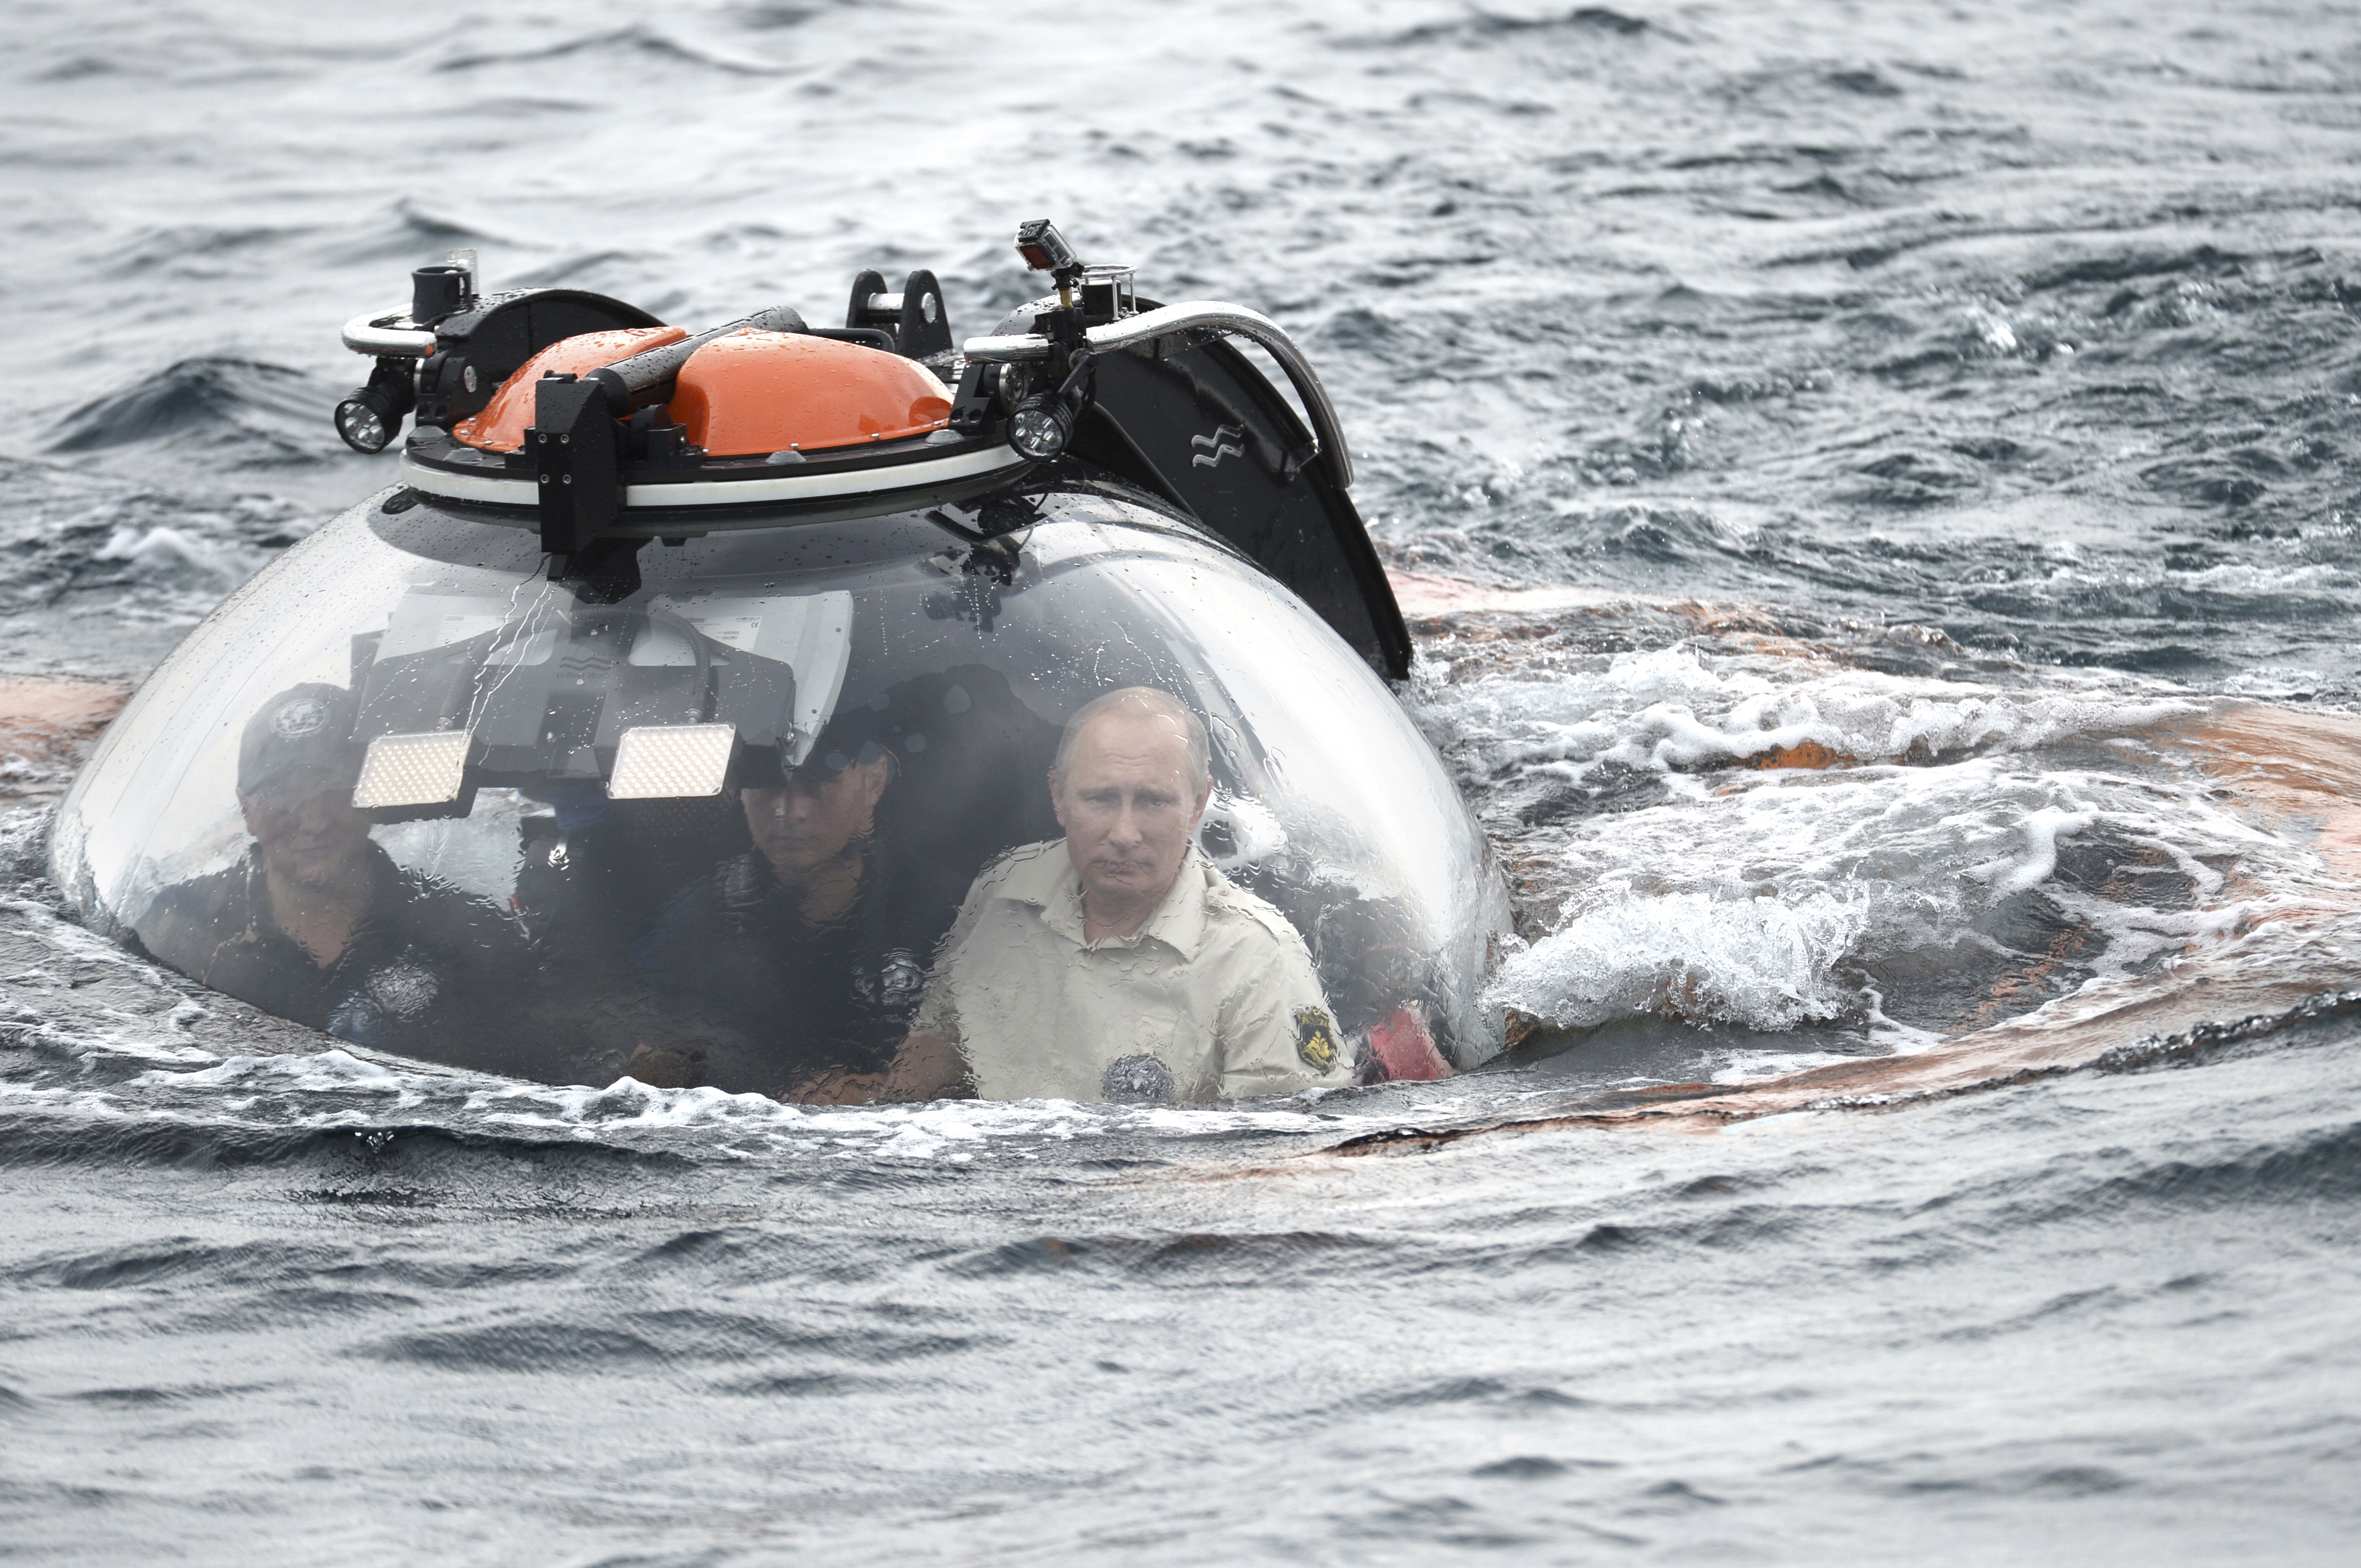 Russian President Putin is seen inside research bathyscaphe while submerging into waters of Black Sea near Sevastopol